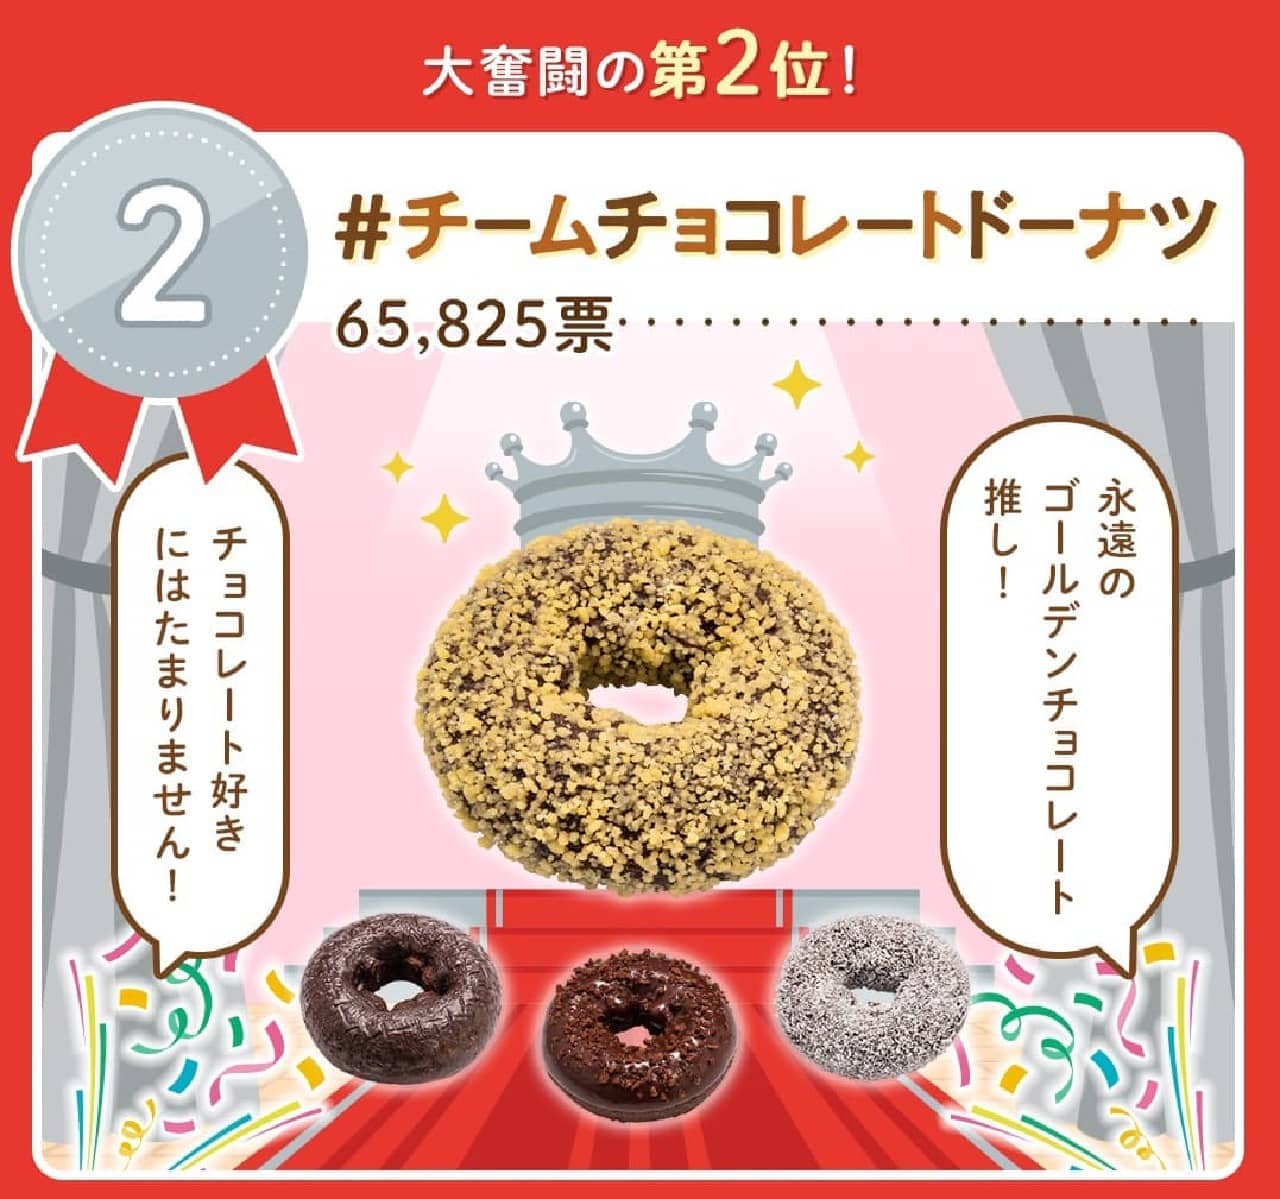 Mr. Donut "#Suishido General Election 2023" results announced.